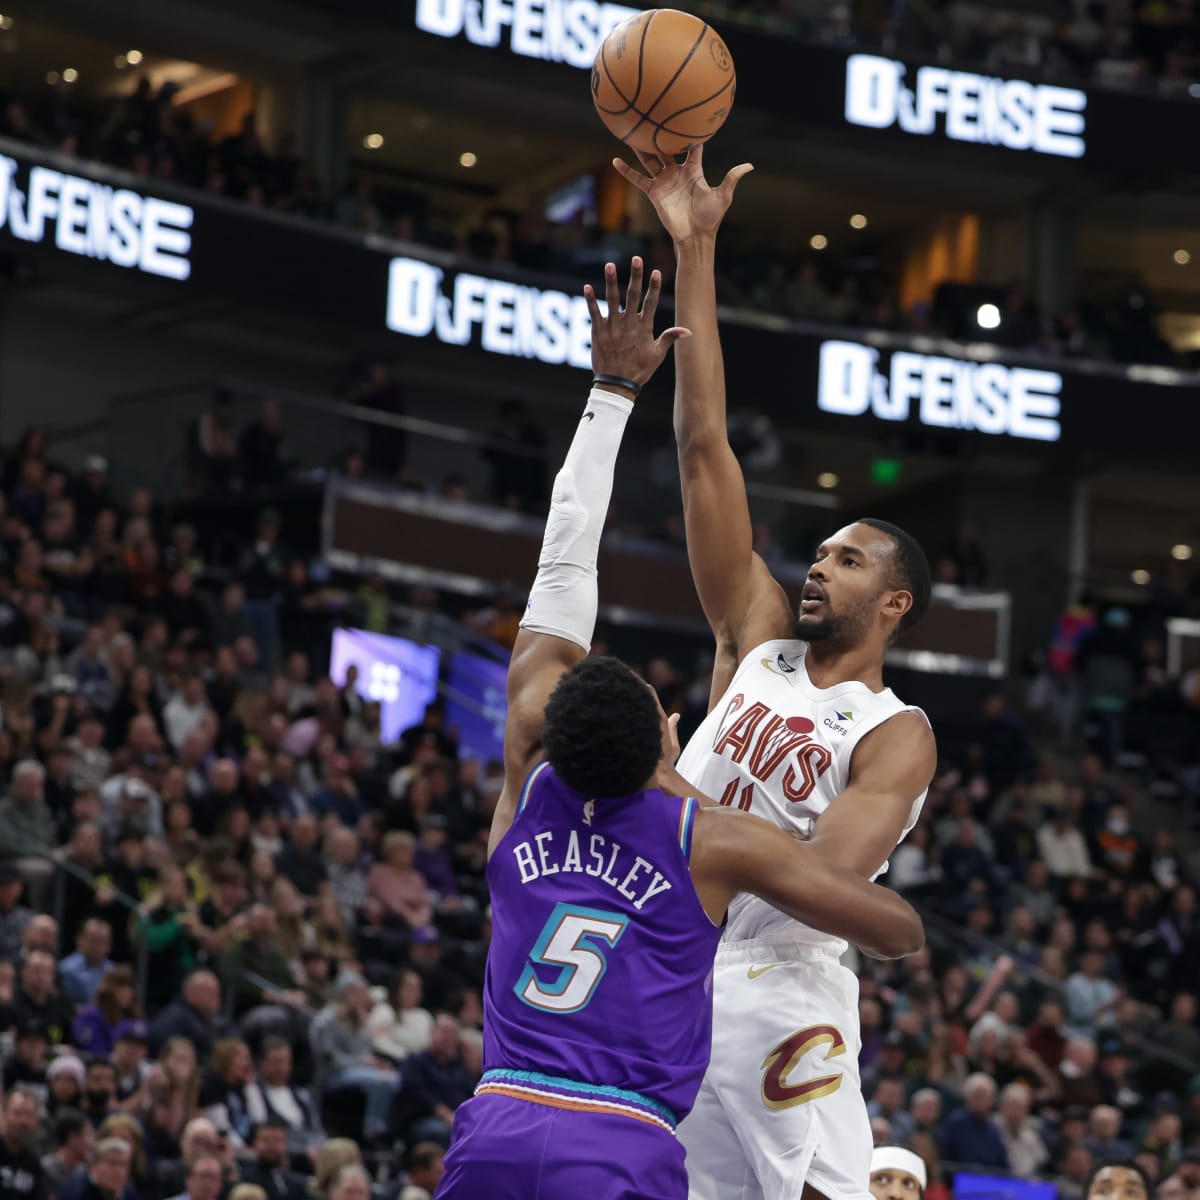 Questions Still Remain On Where And When To Play Caris LeVert - Sports  Illustrated Cleveland Cavs News, Analysis and More